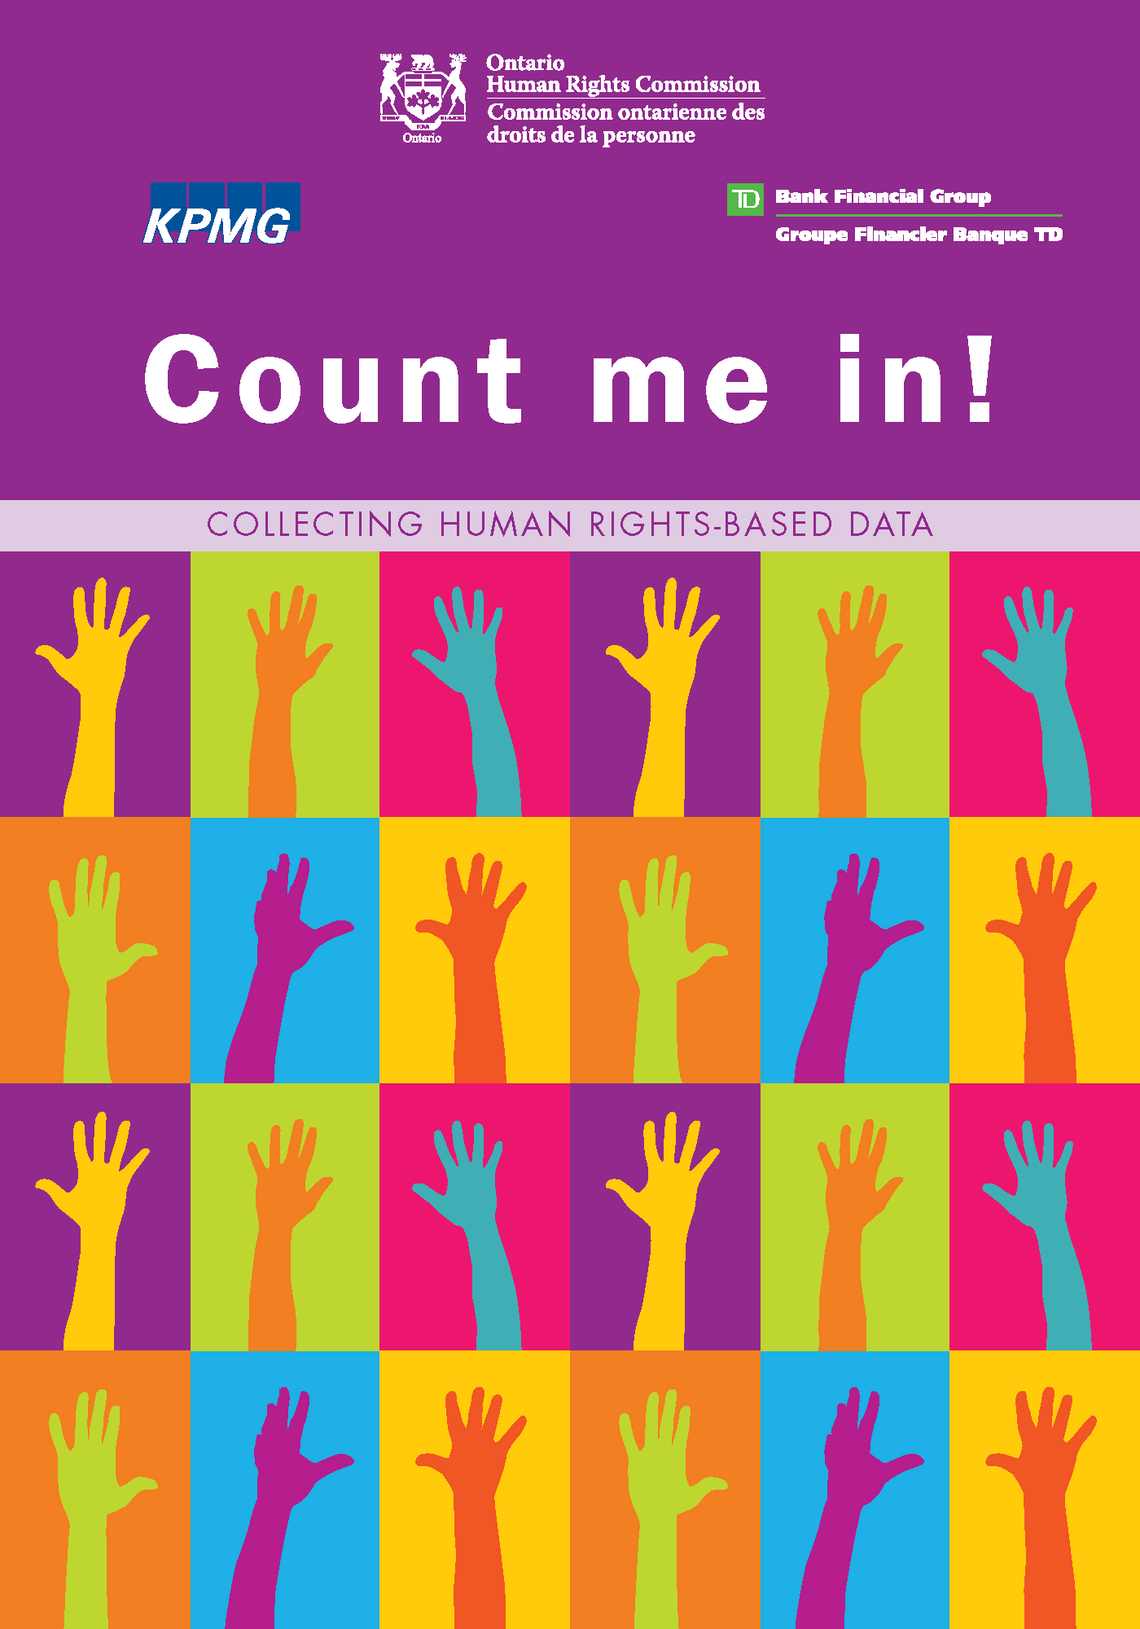 Count me in! Collecting human rights-based data | Ontario Human Rights Commission